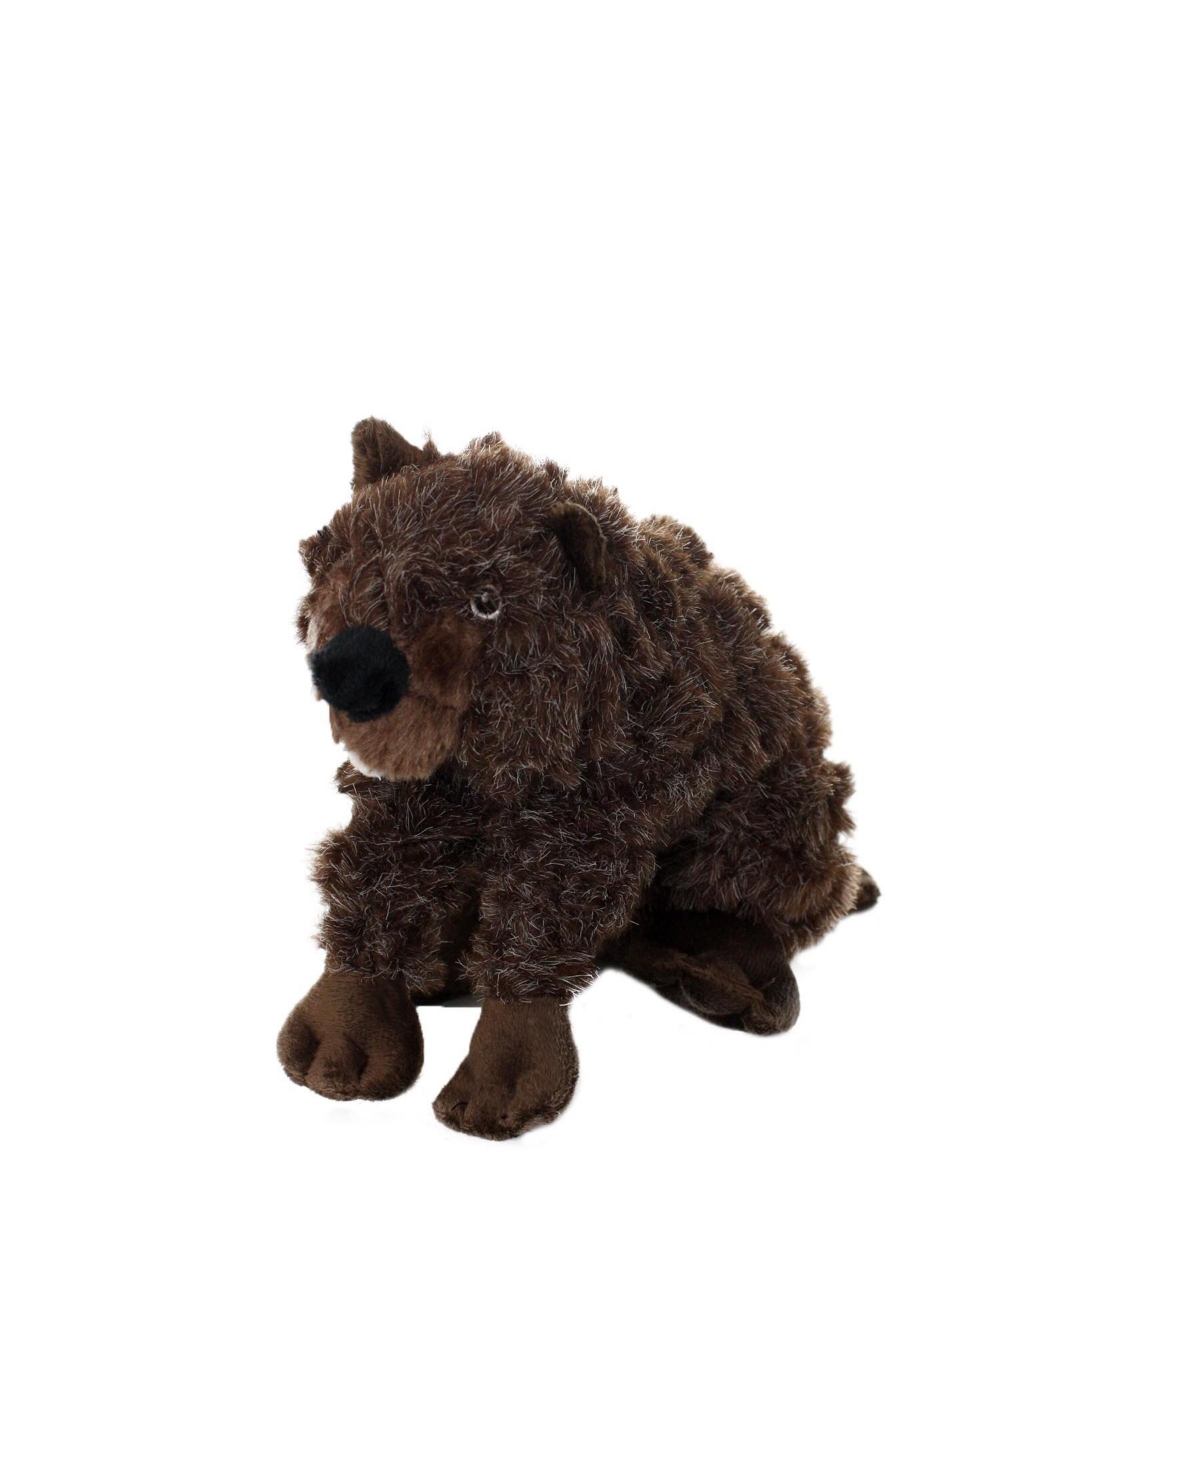 Nature Beaver, Dog Toy - Brown